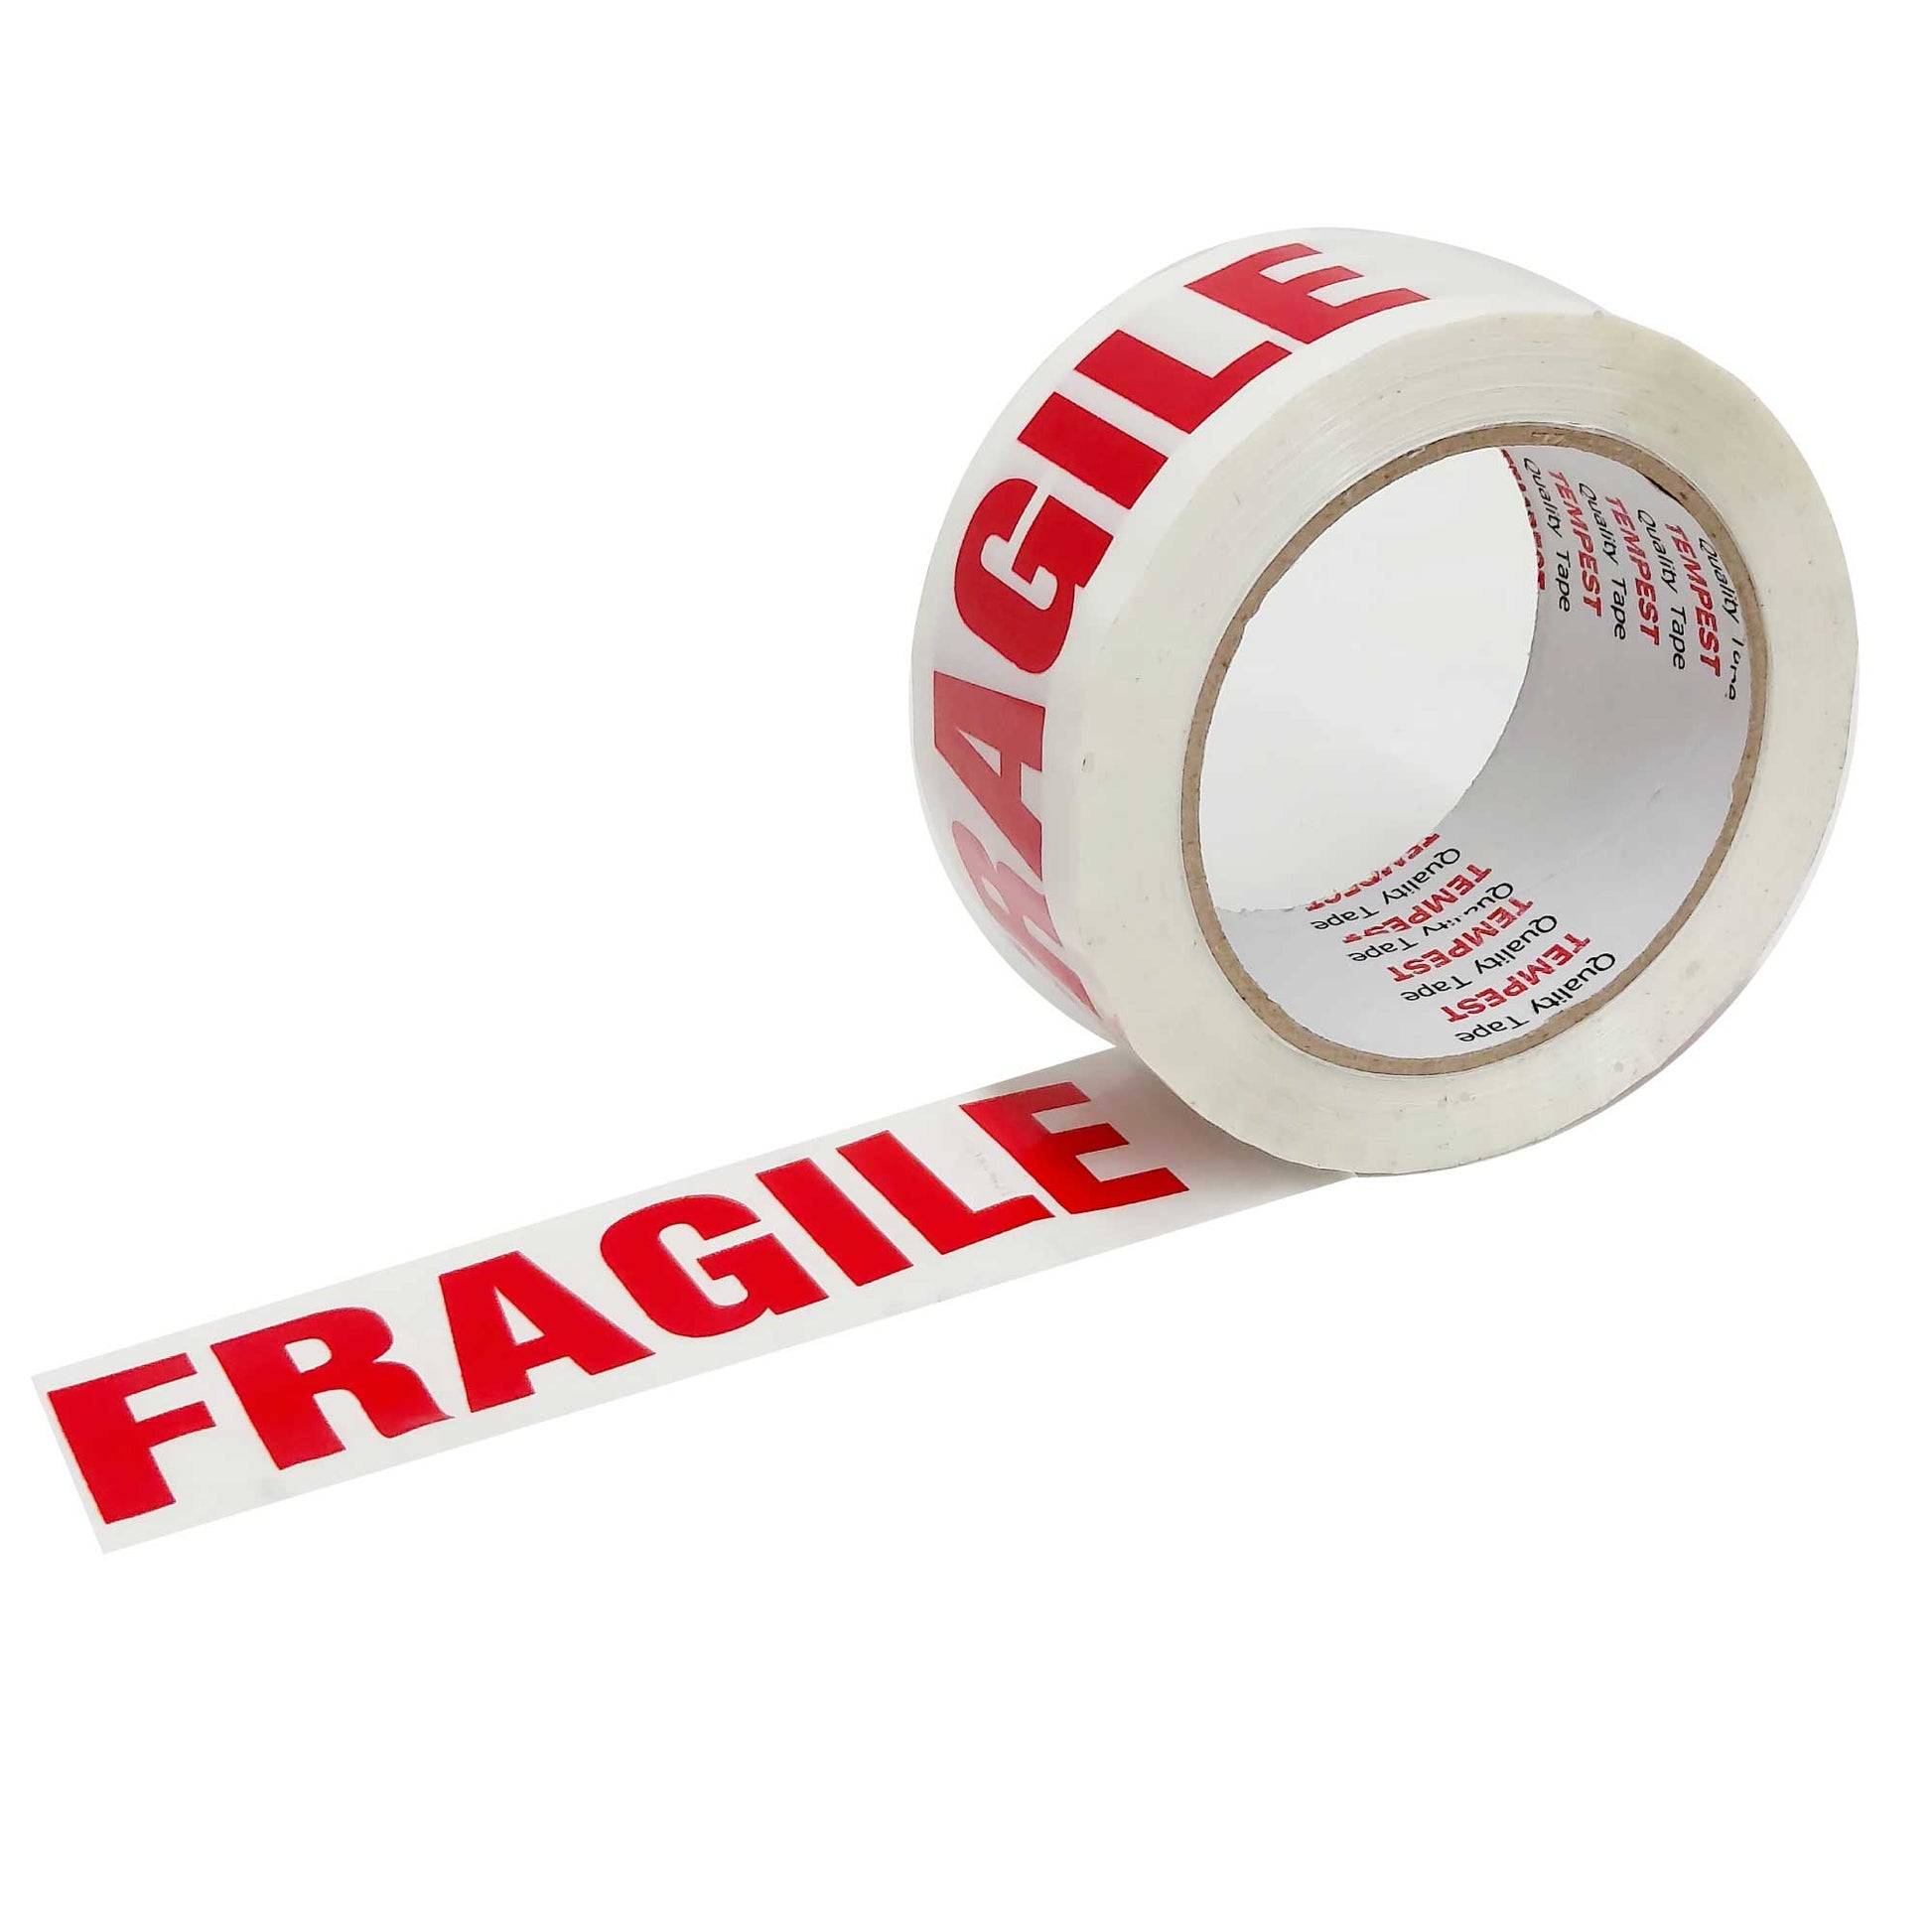 36x Fragile Packing Tape 48mmx75m Long Rolls Red White Packaging Adhesive Label